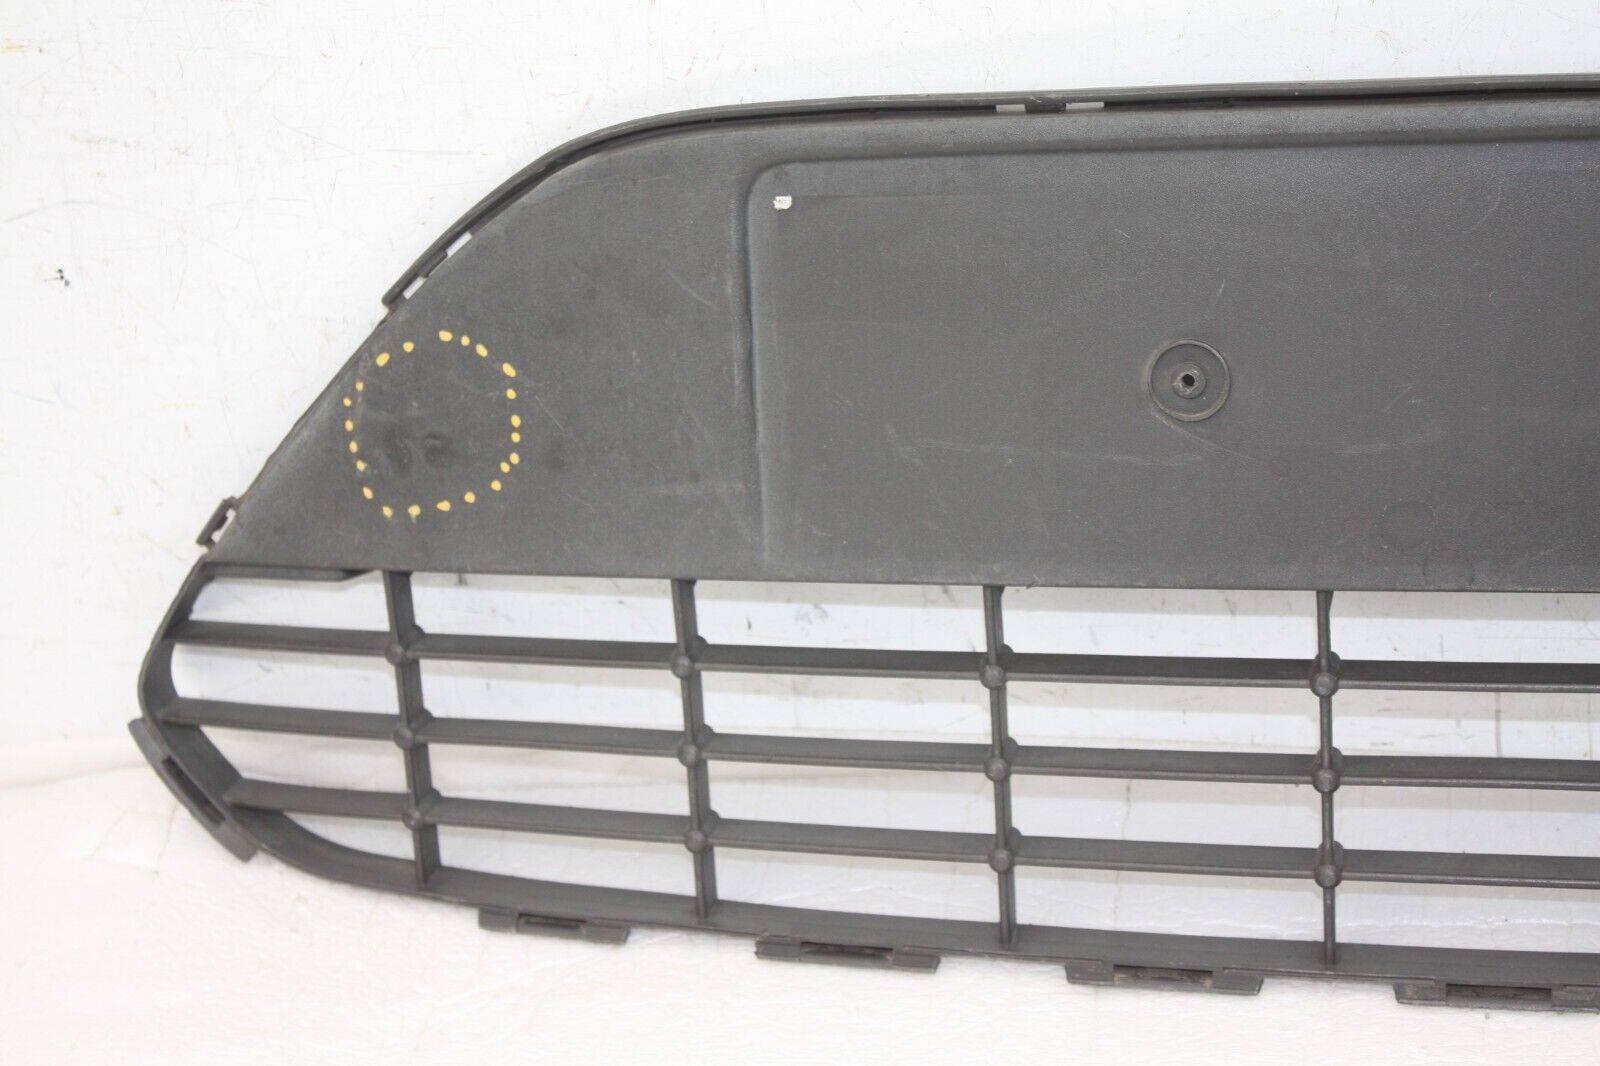 Ford-Focus-Front-Bumper-Grill-2008-TO-2011-8M51-17B968-BE-Genuine-DAMAGED-176410989719-4